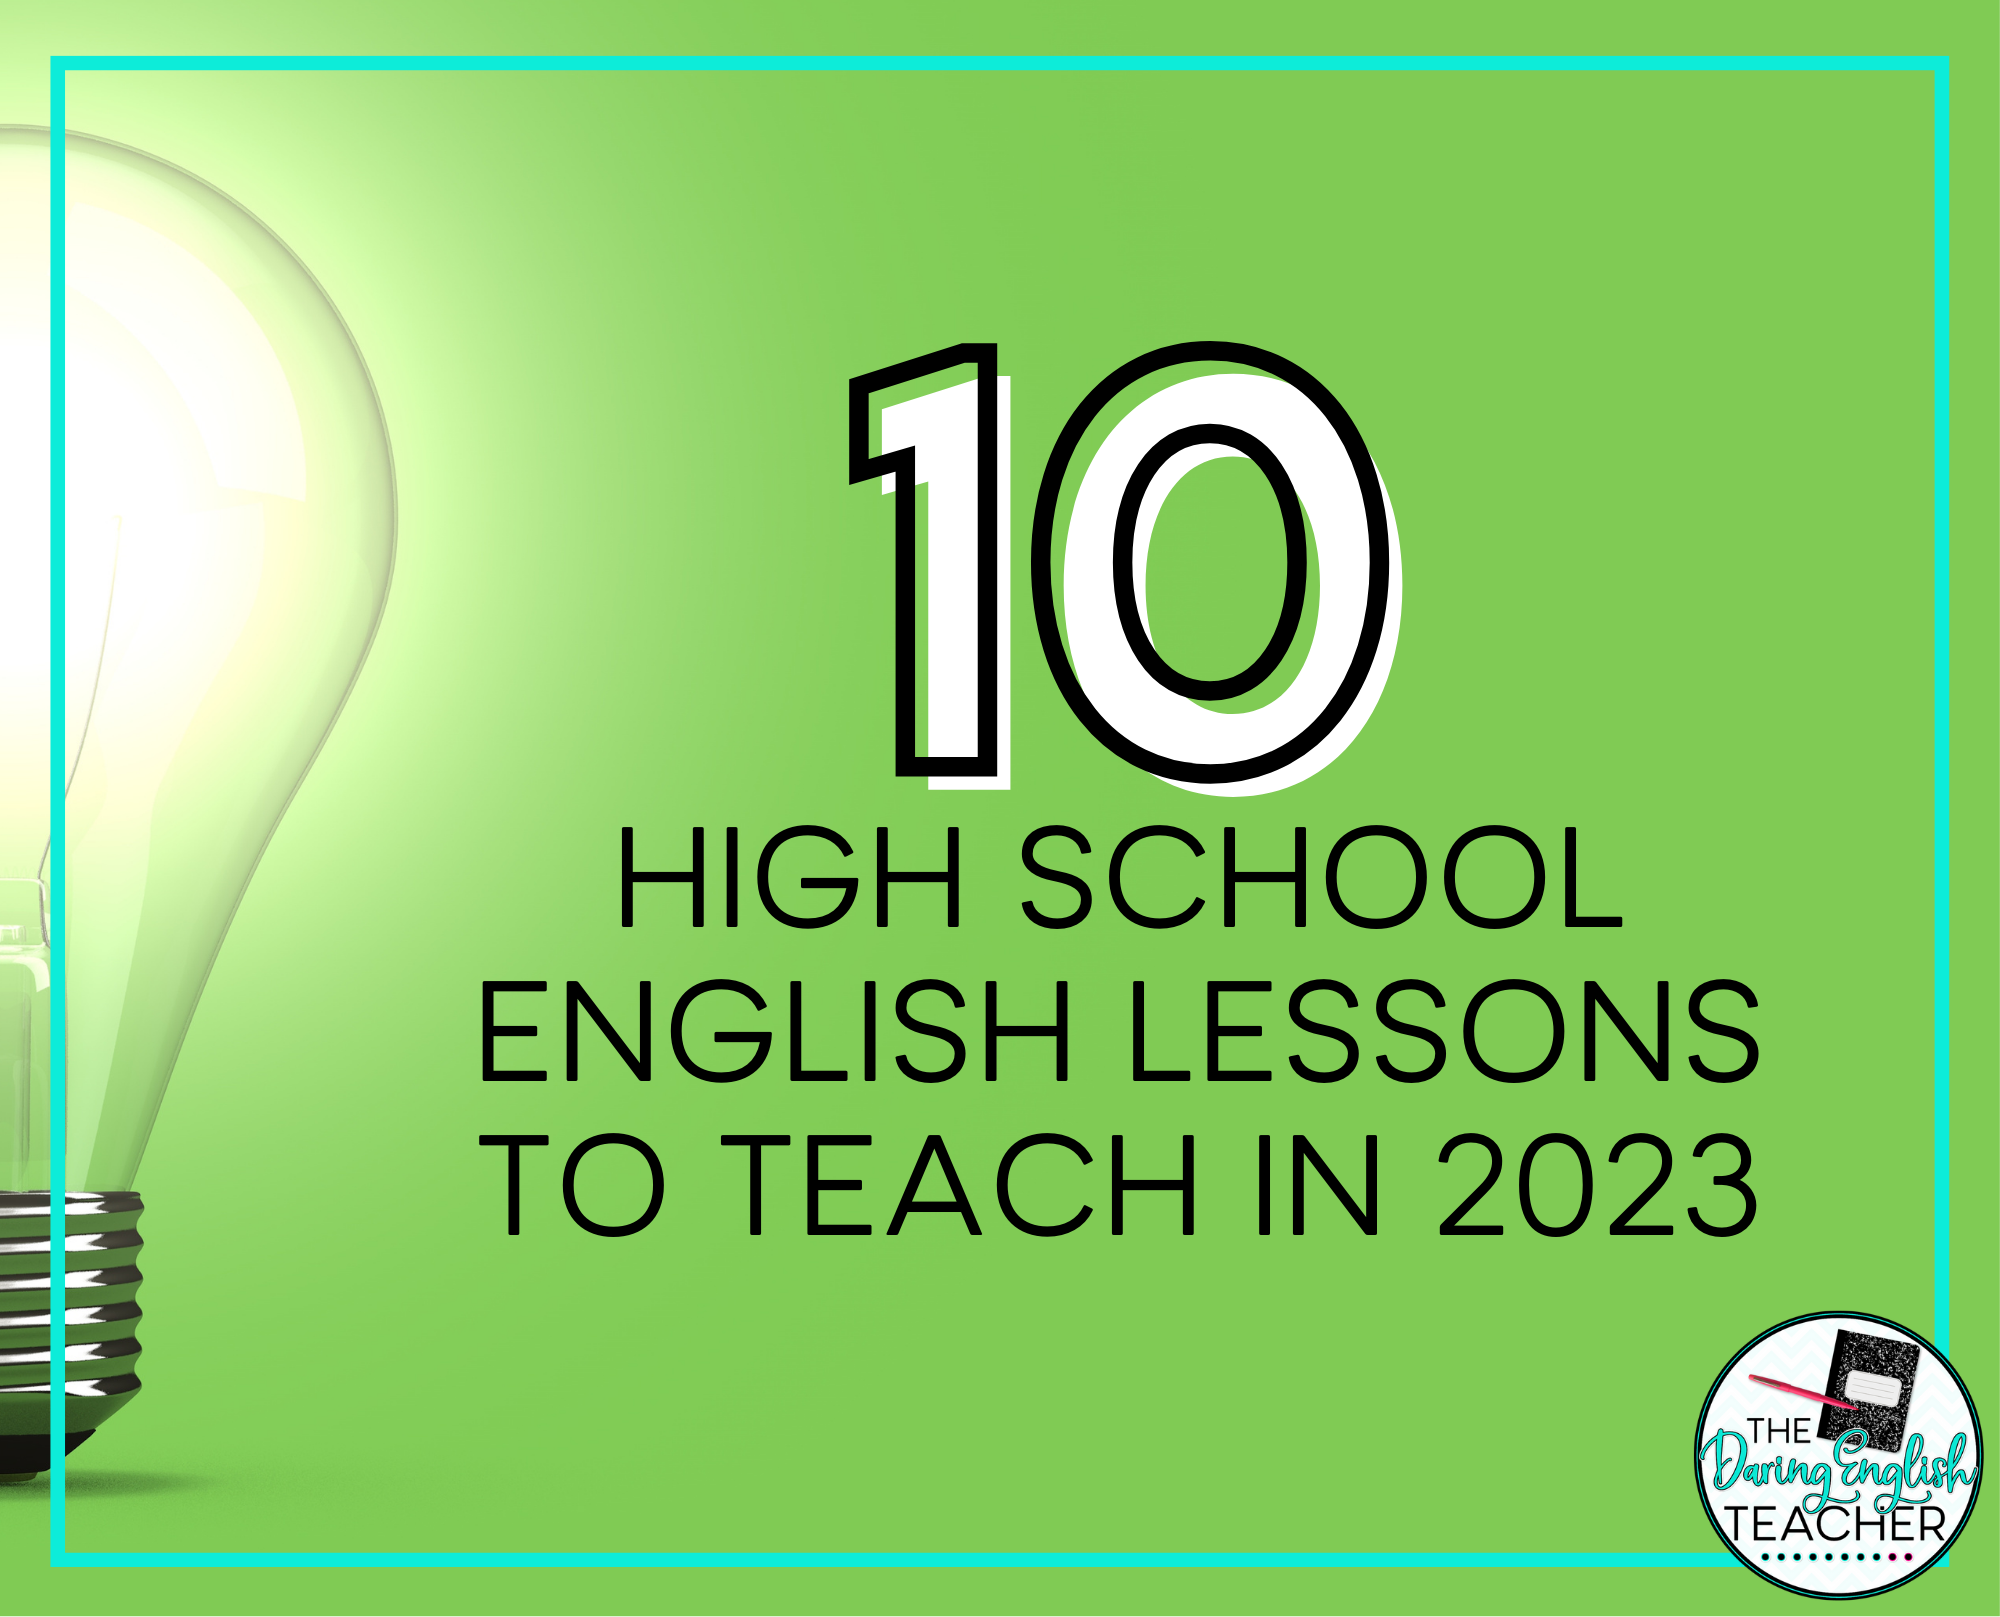 10 High School English Lessons to Teach in 2023